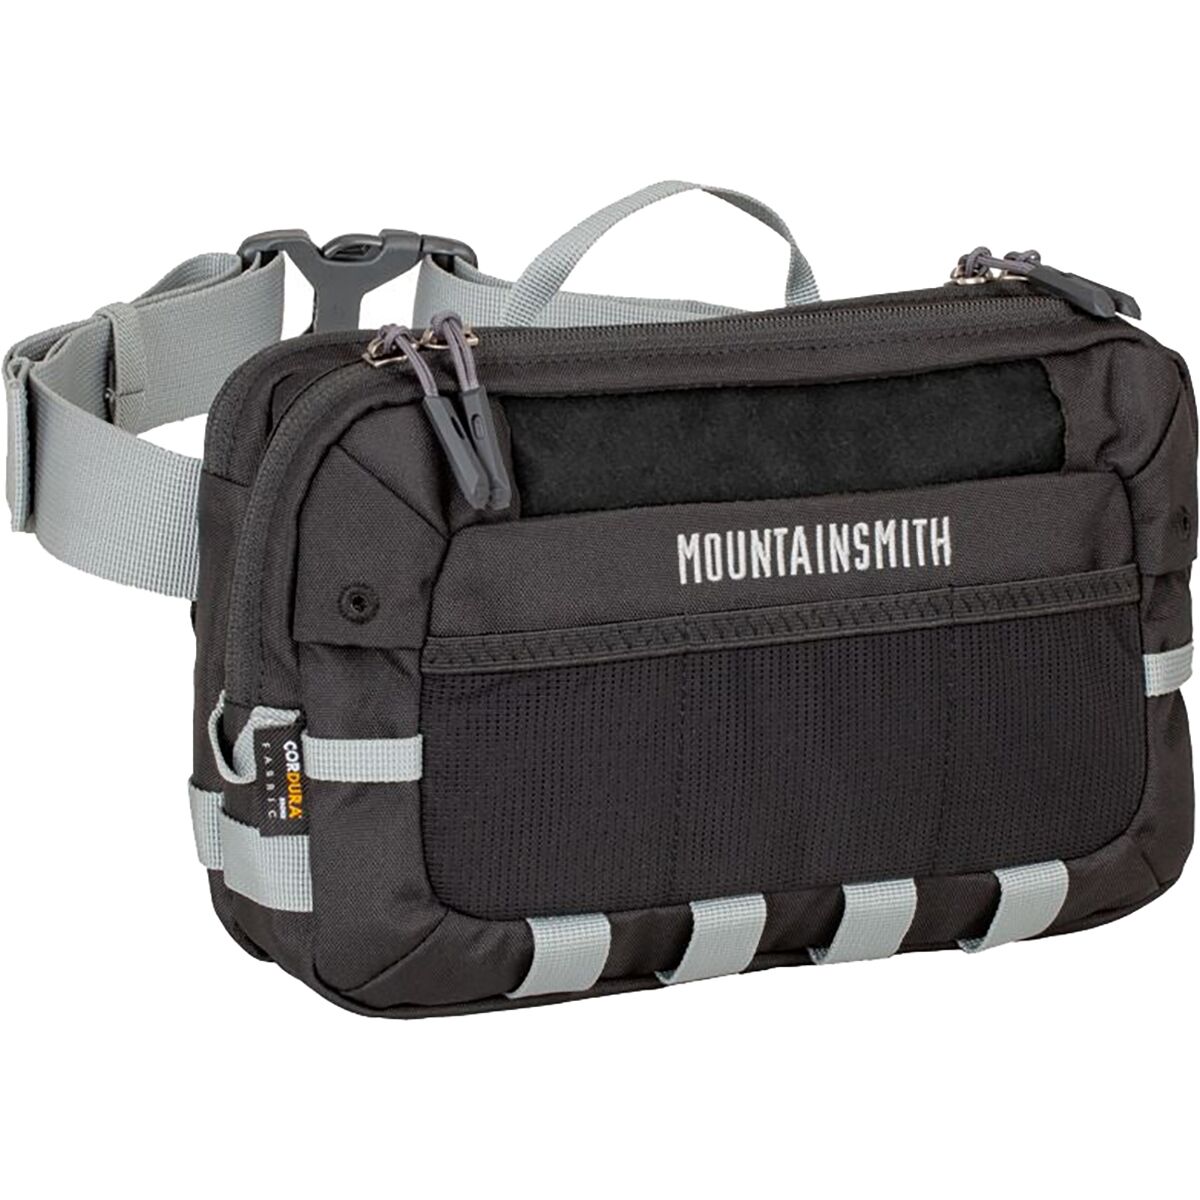 Vibe - Small Fanny Pack - Mountainsmith